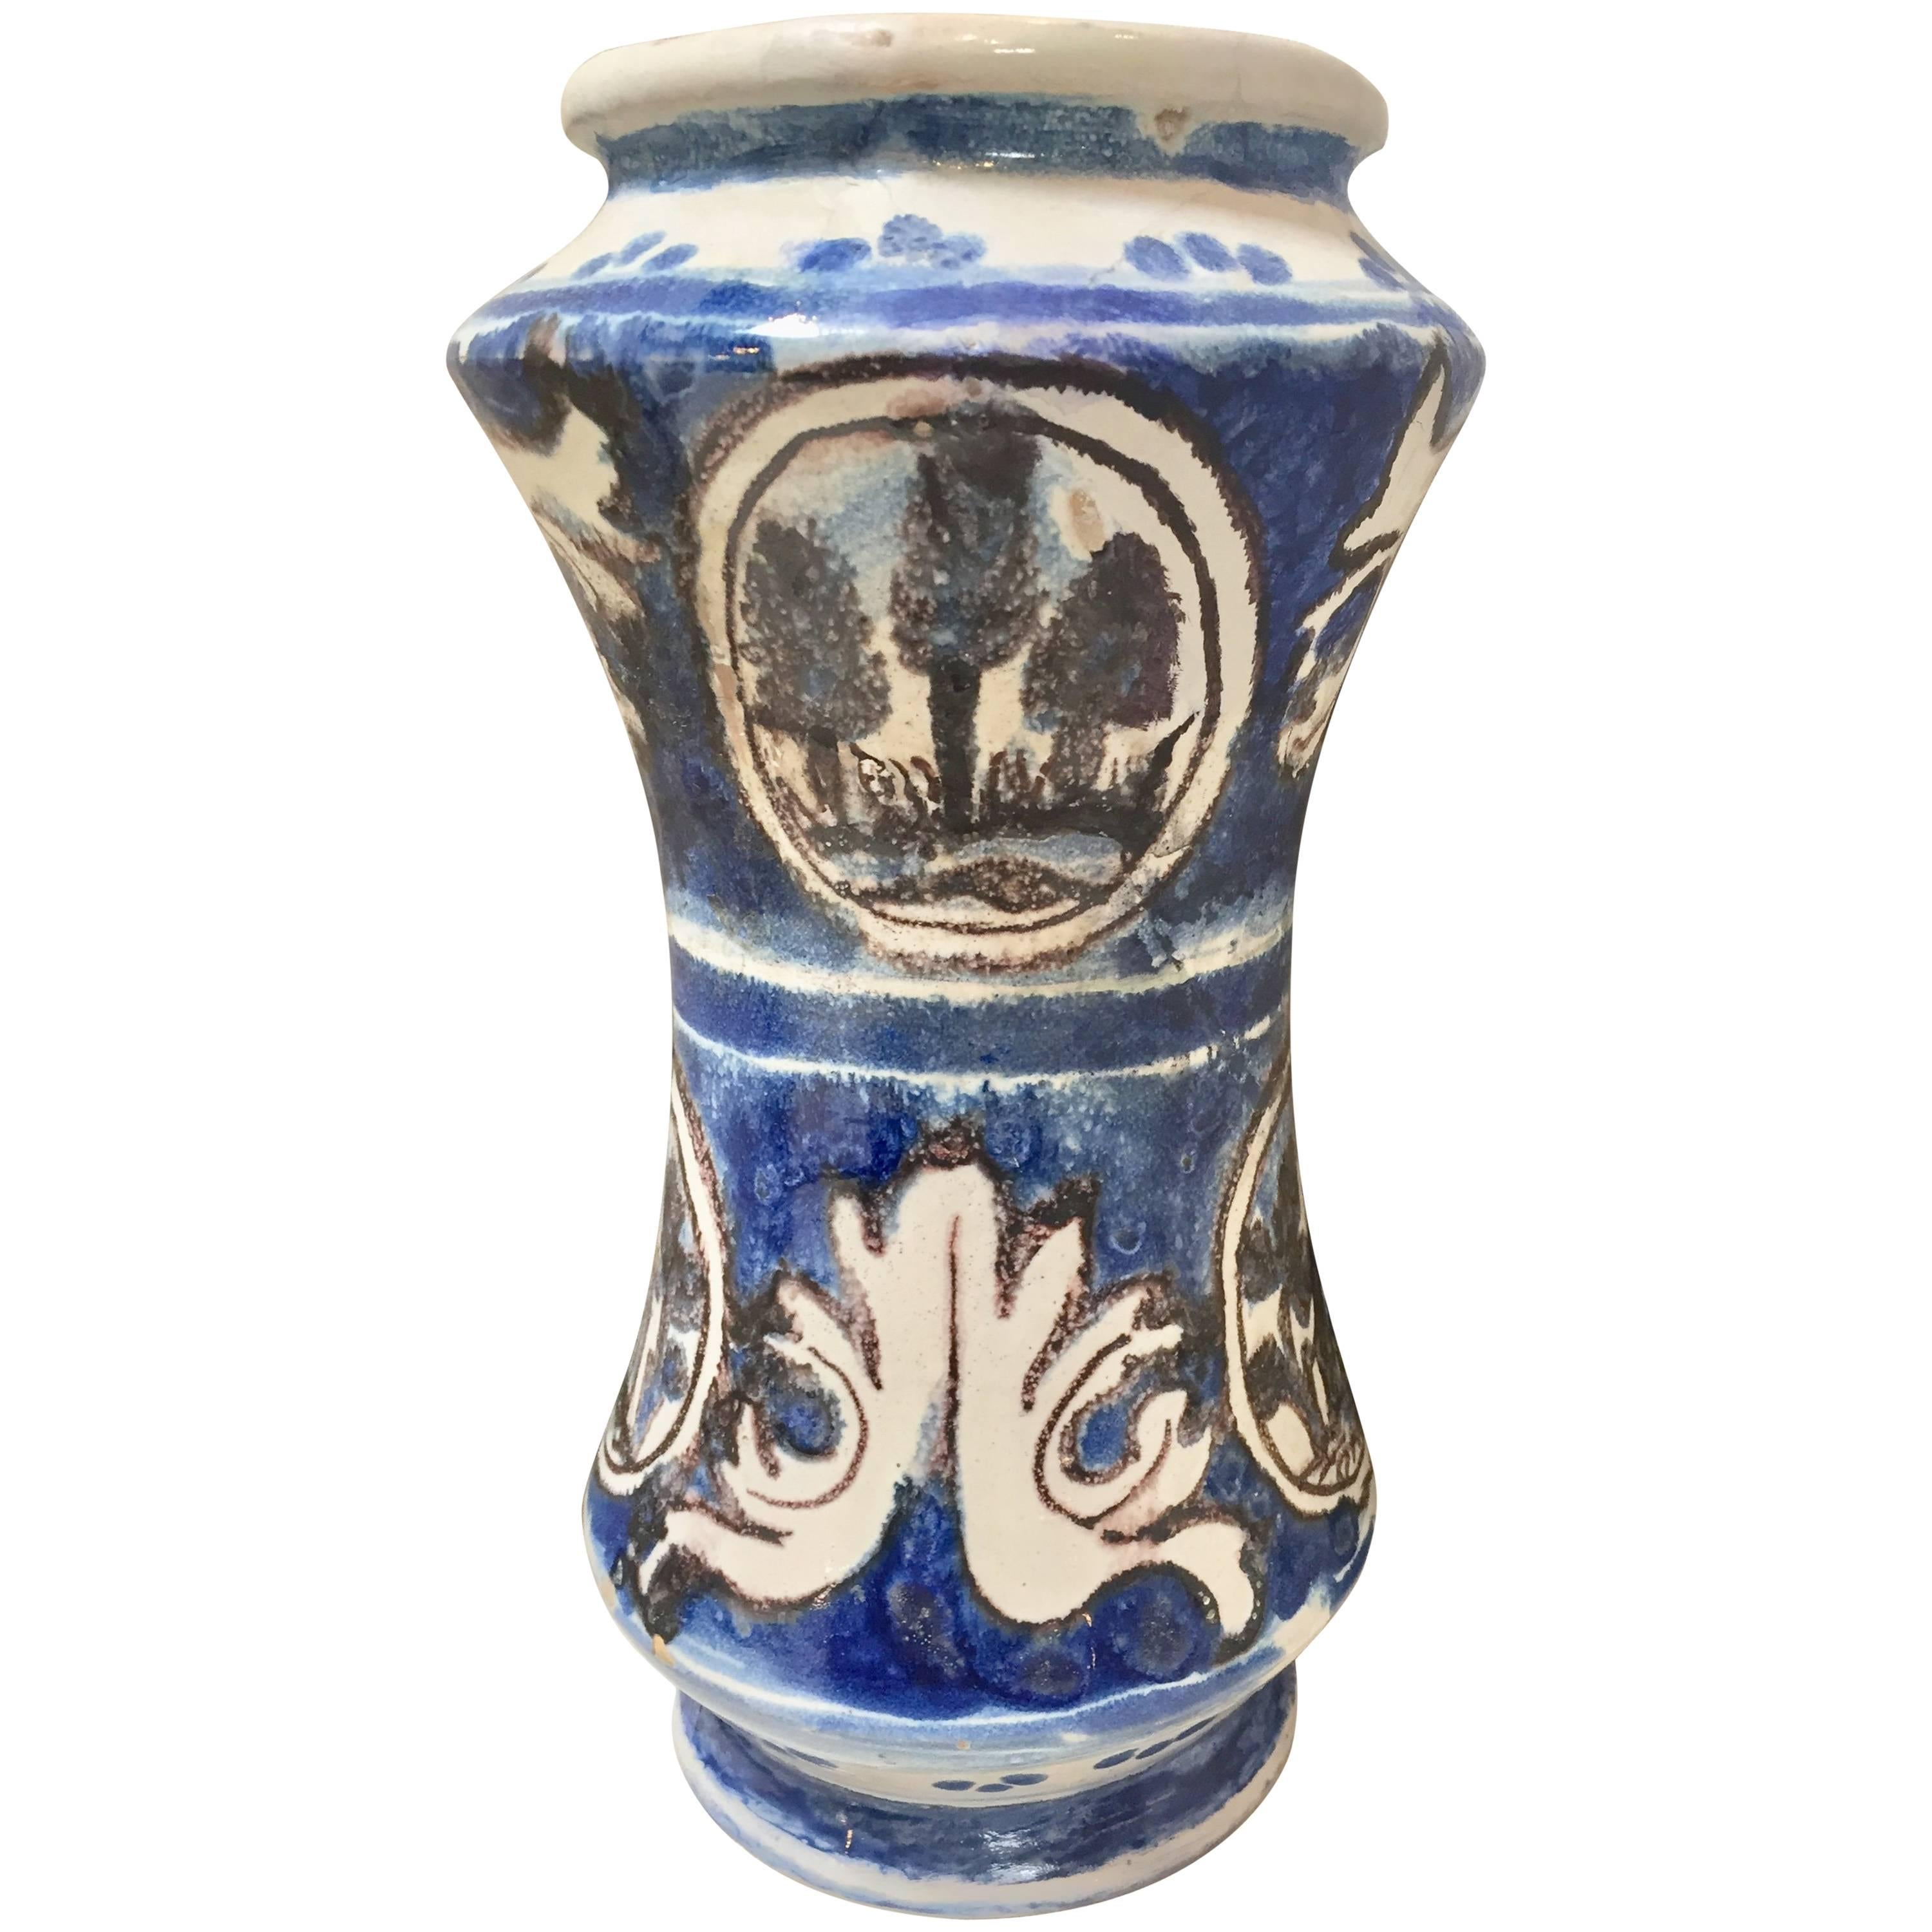 Vase from Spain 18th Century